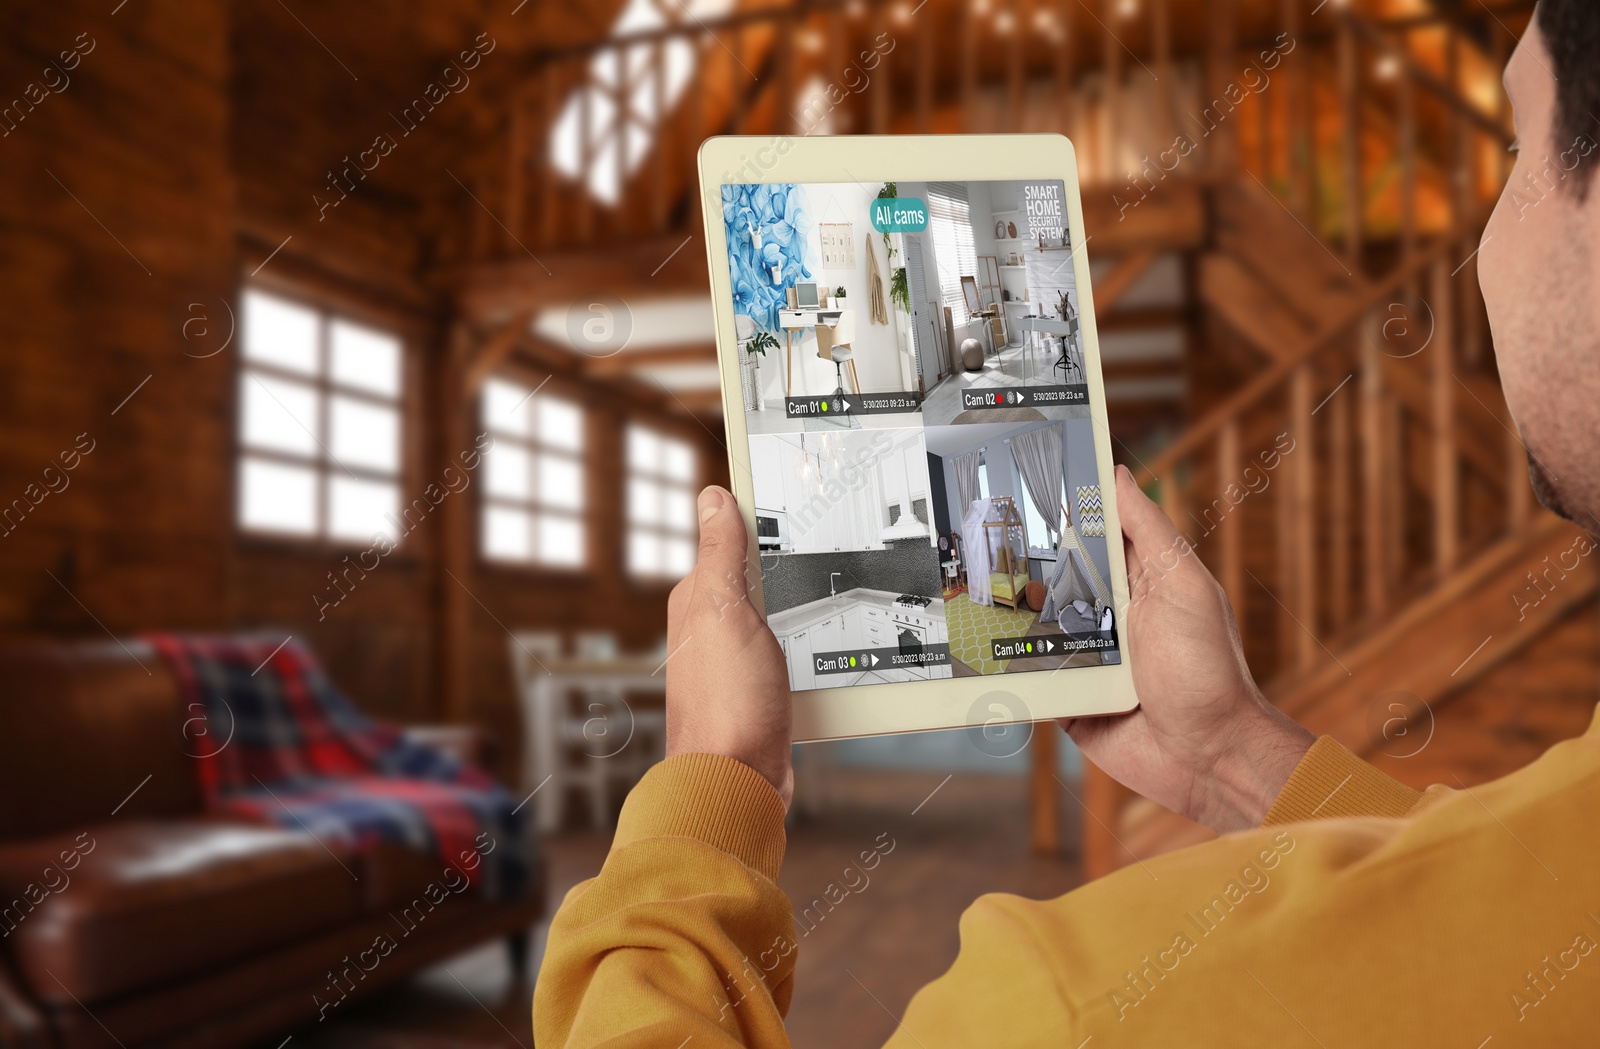 Image of Man using smart home security system on tablet computer indoors, closeup. Device showing different rooms through cameras